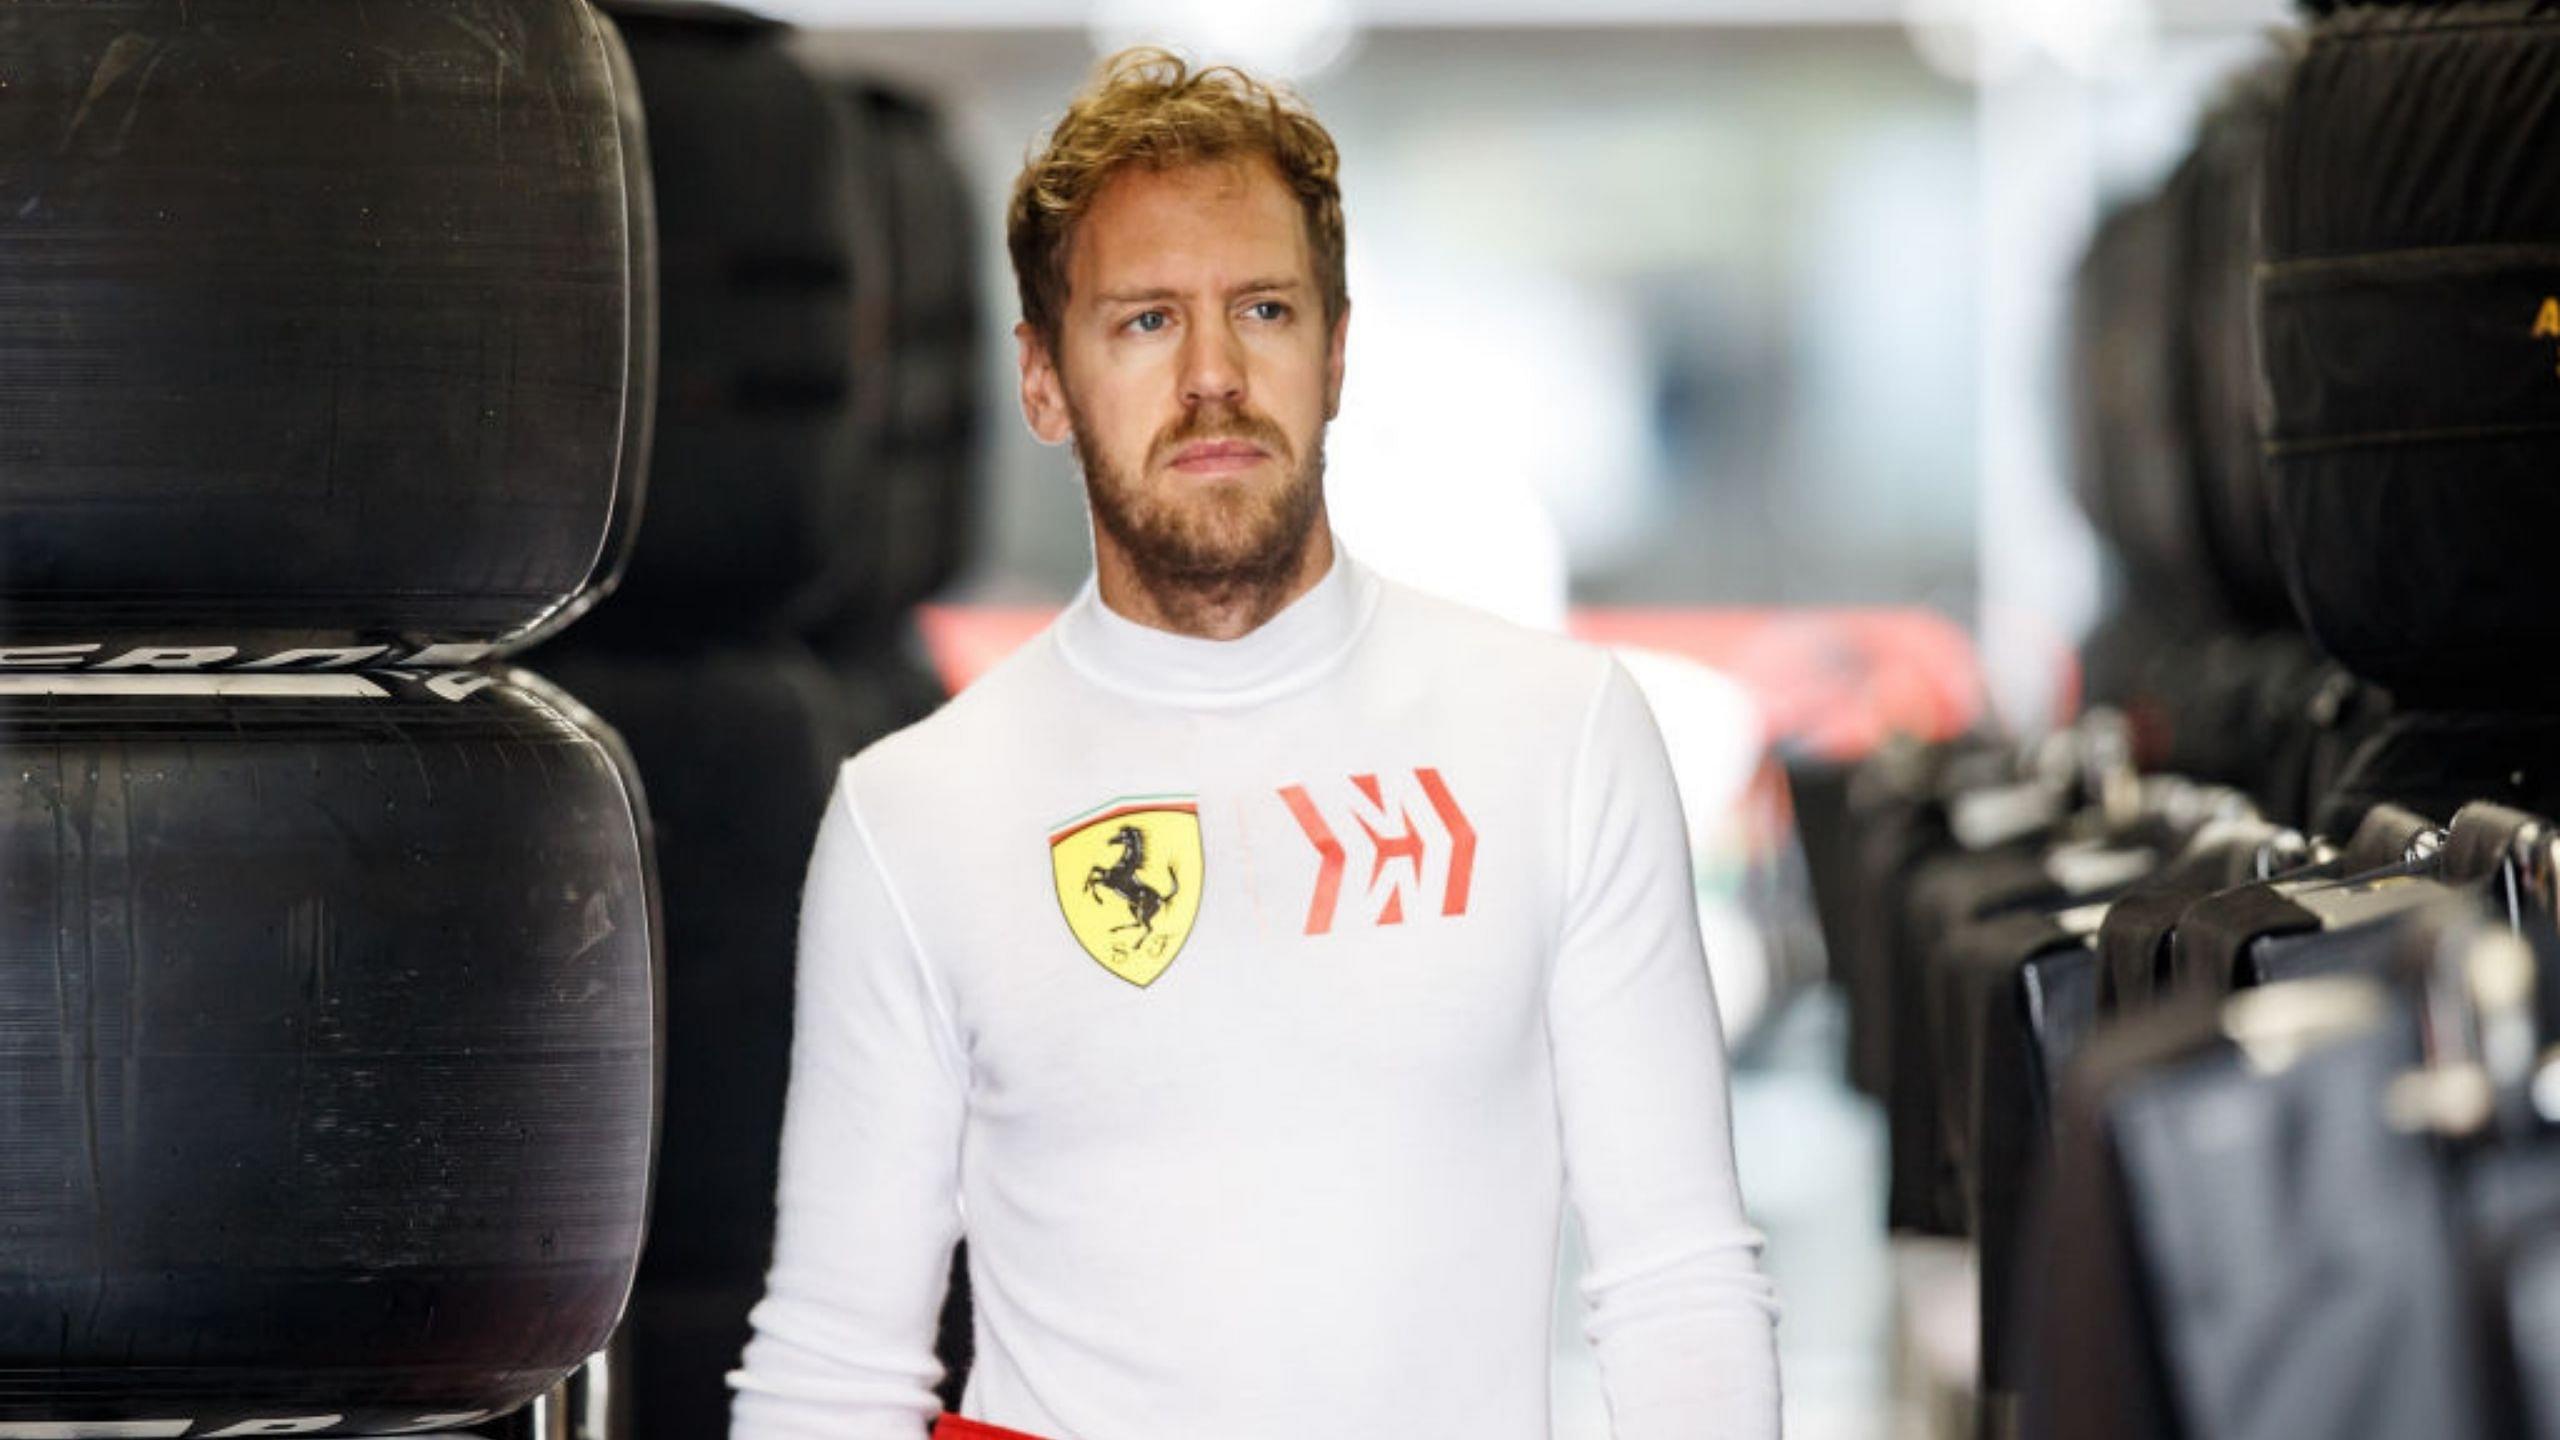 Synthetic fuels F1: Sebastian Vettel gives his show of approval for the use of synthetic fuels in F1